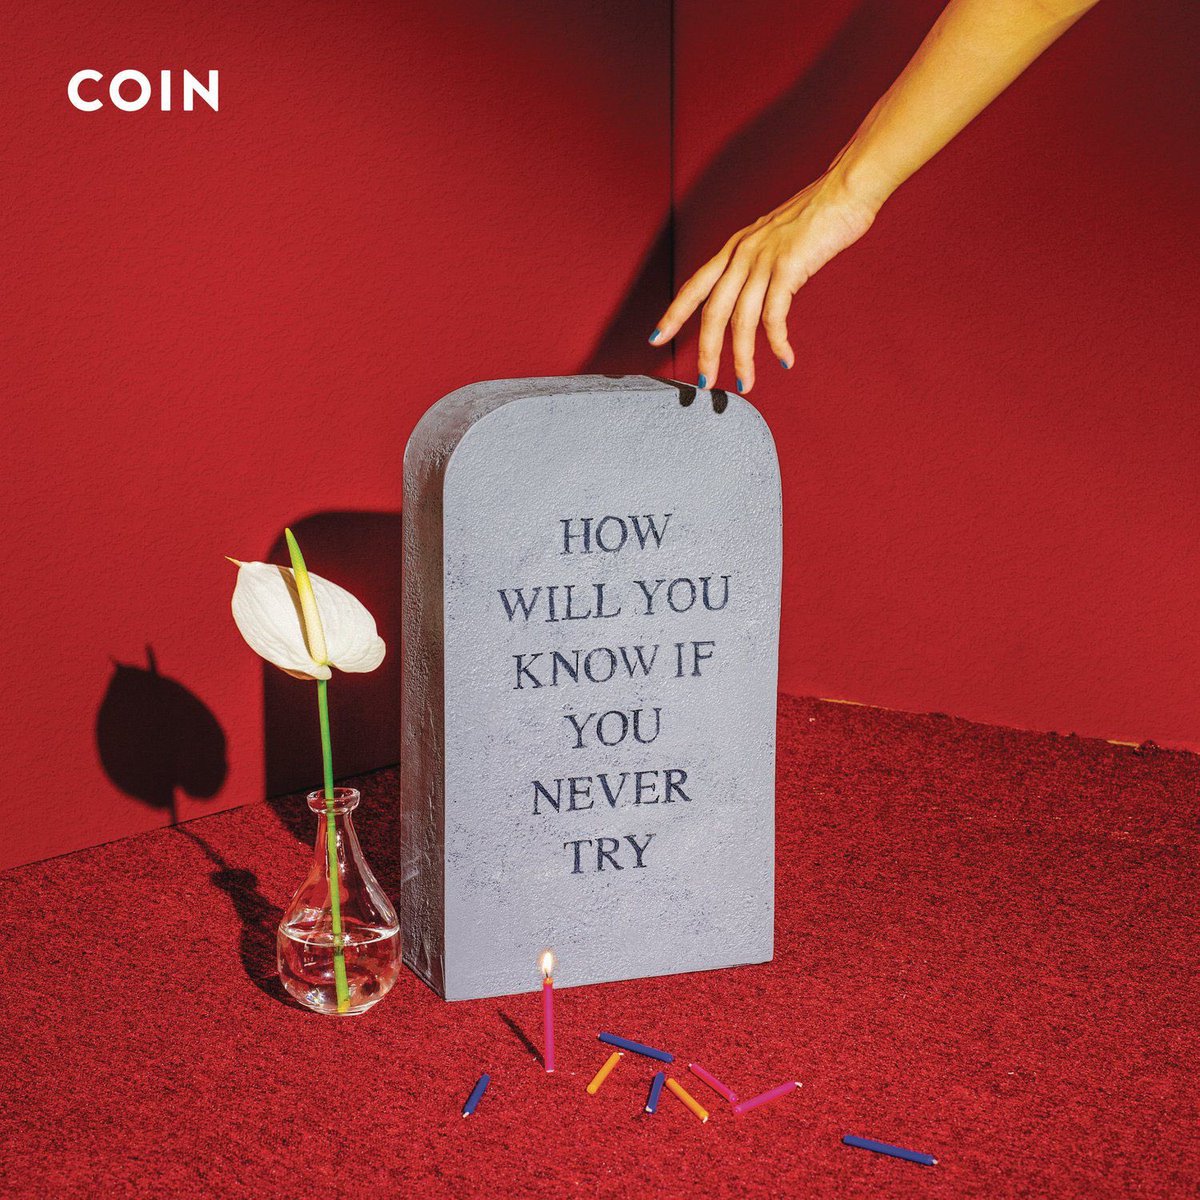 𝚝𝚊𝚕𝚔 𝚝𝚘𝚘 𝚖𝚞𝚌𝚑coinhow will you know if you never try (2017)